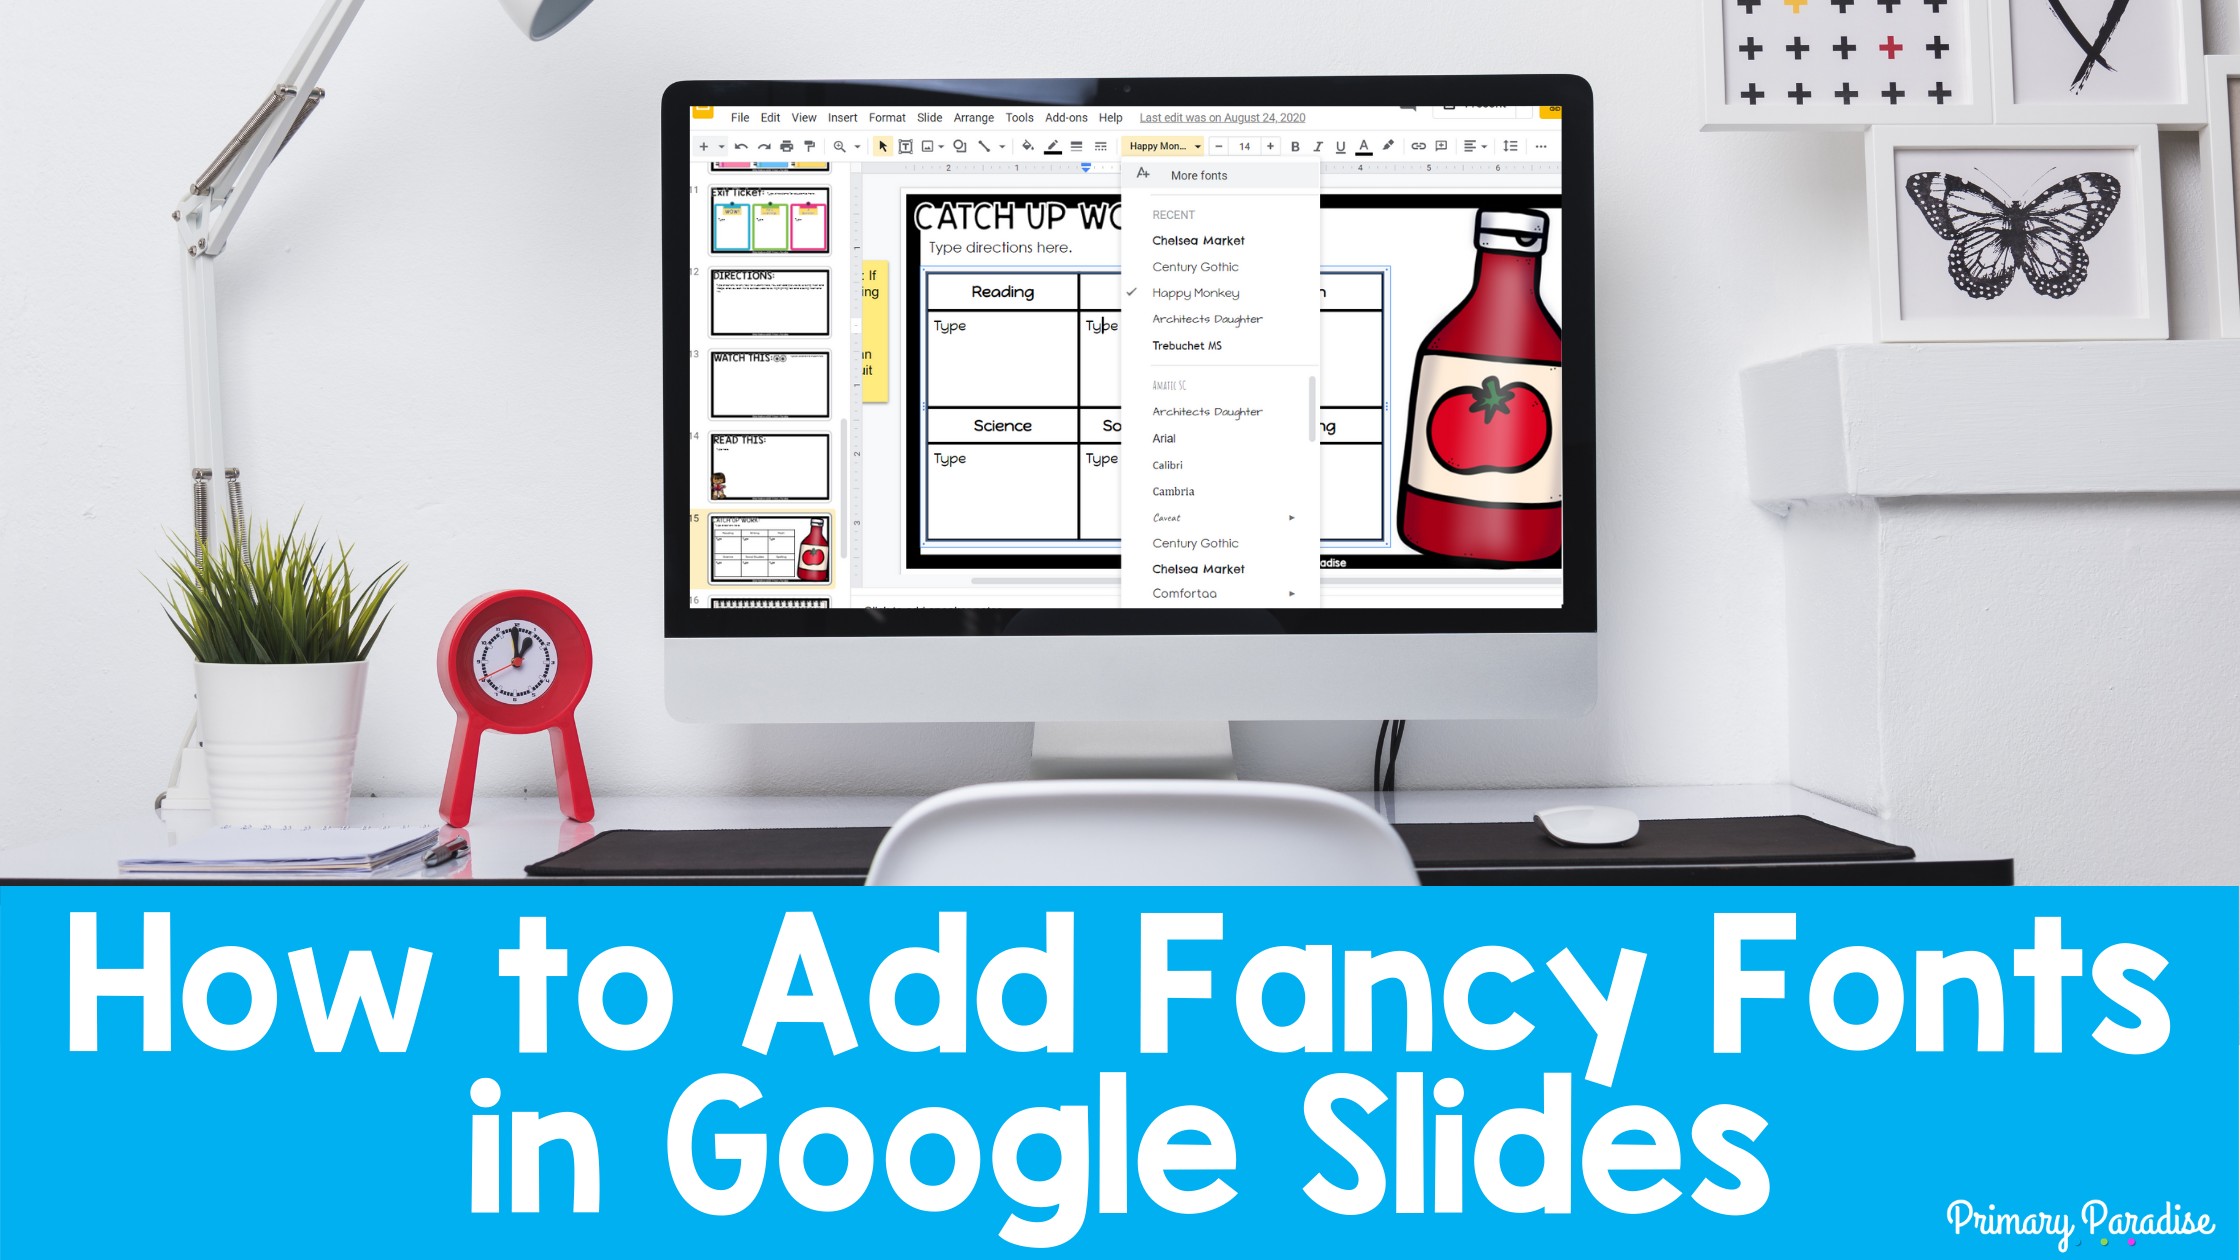 How to Access More Fonts in Google Slides